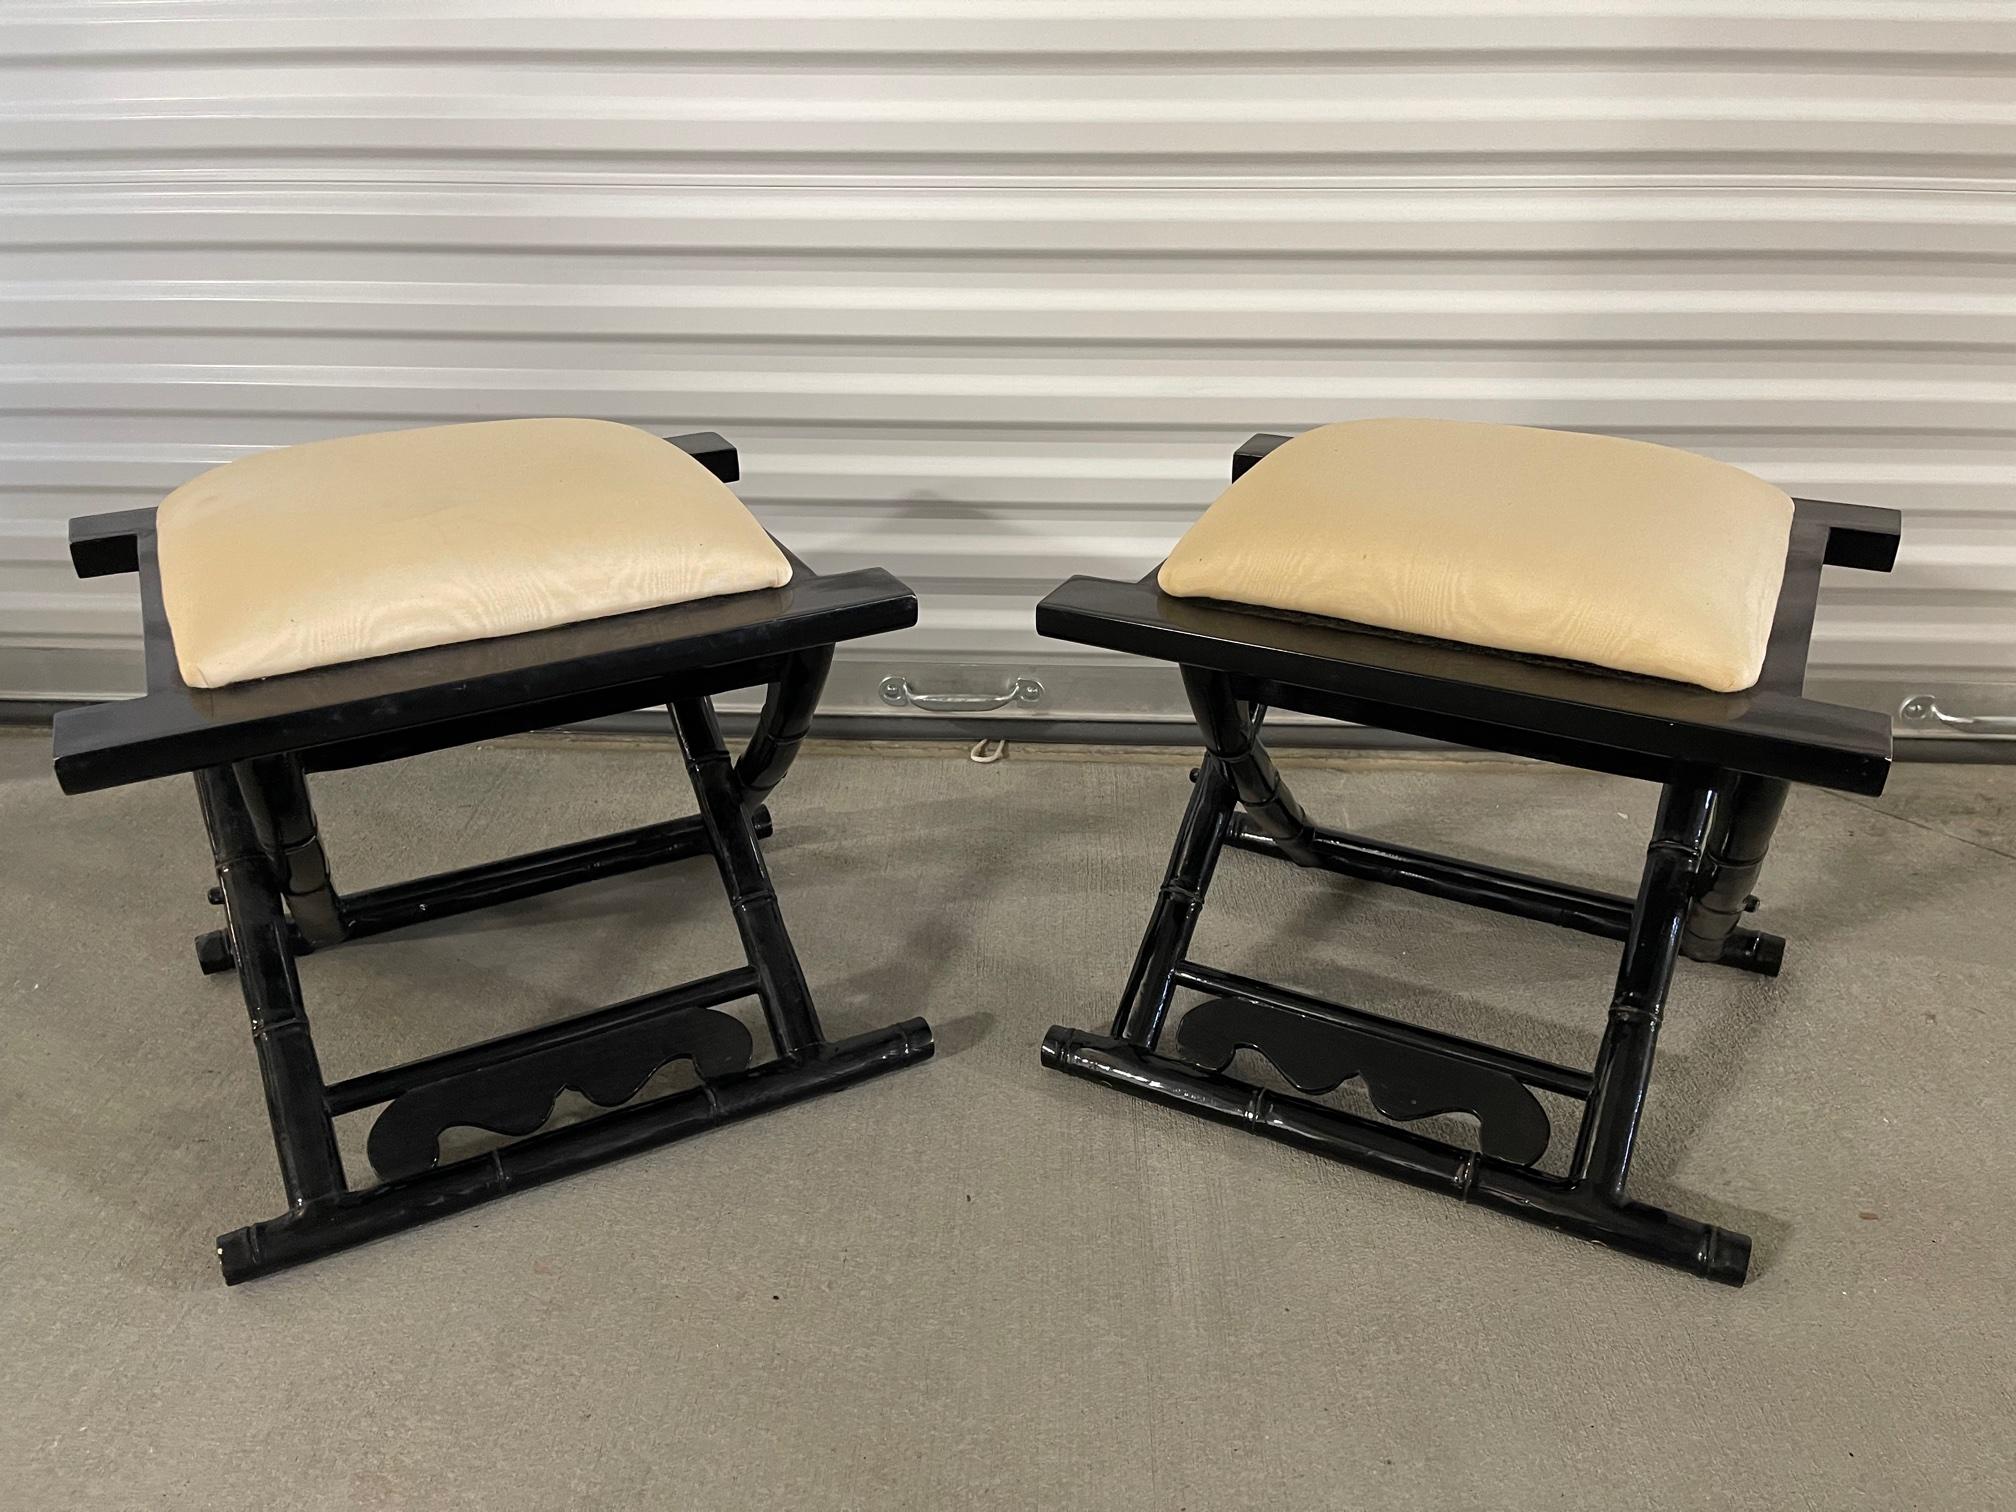 Pair of possibly Casa Bella black lacquer designer benches or stools, 20th century. Bamboo style design.
Upholstered seats.
  